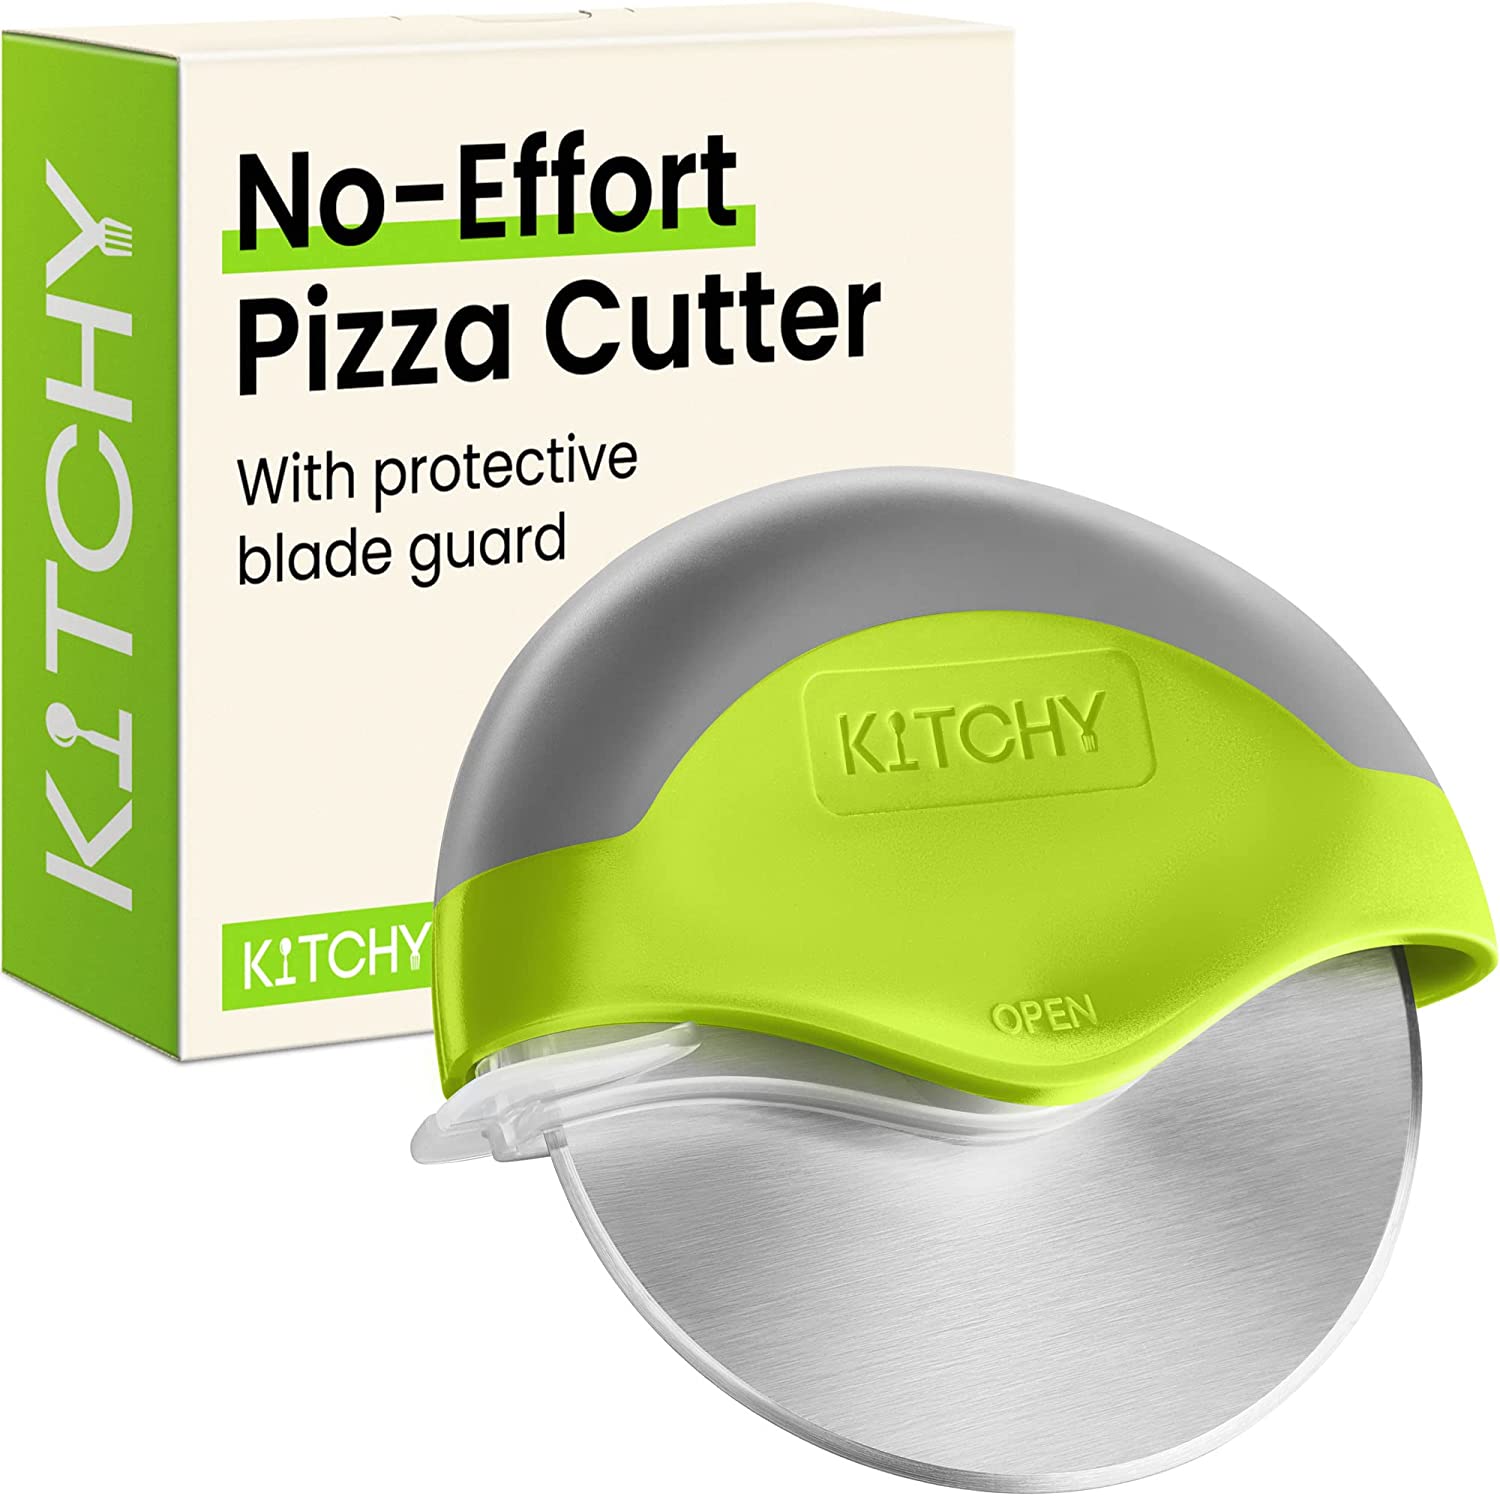 Kitchy Pizza Cutter Wheel with Protective Blade Cover